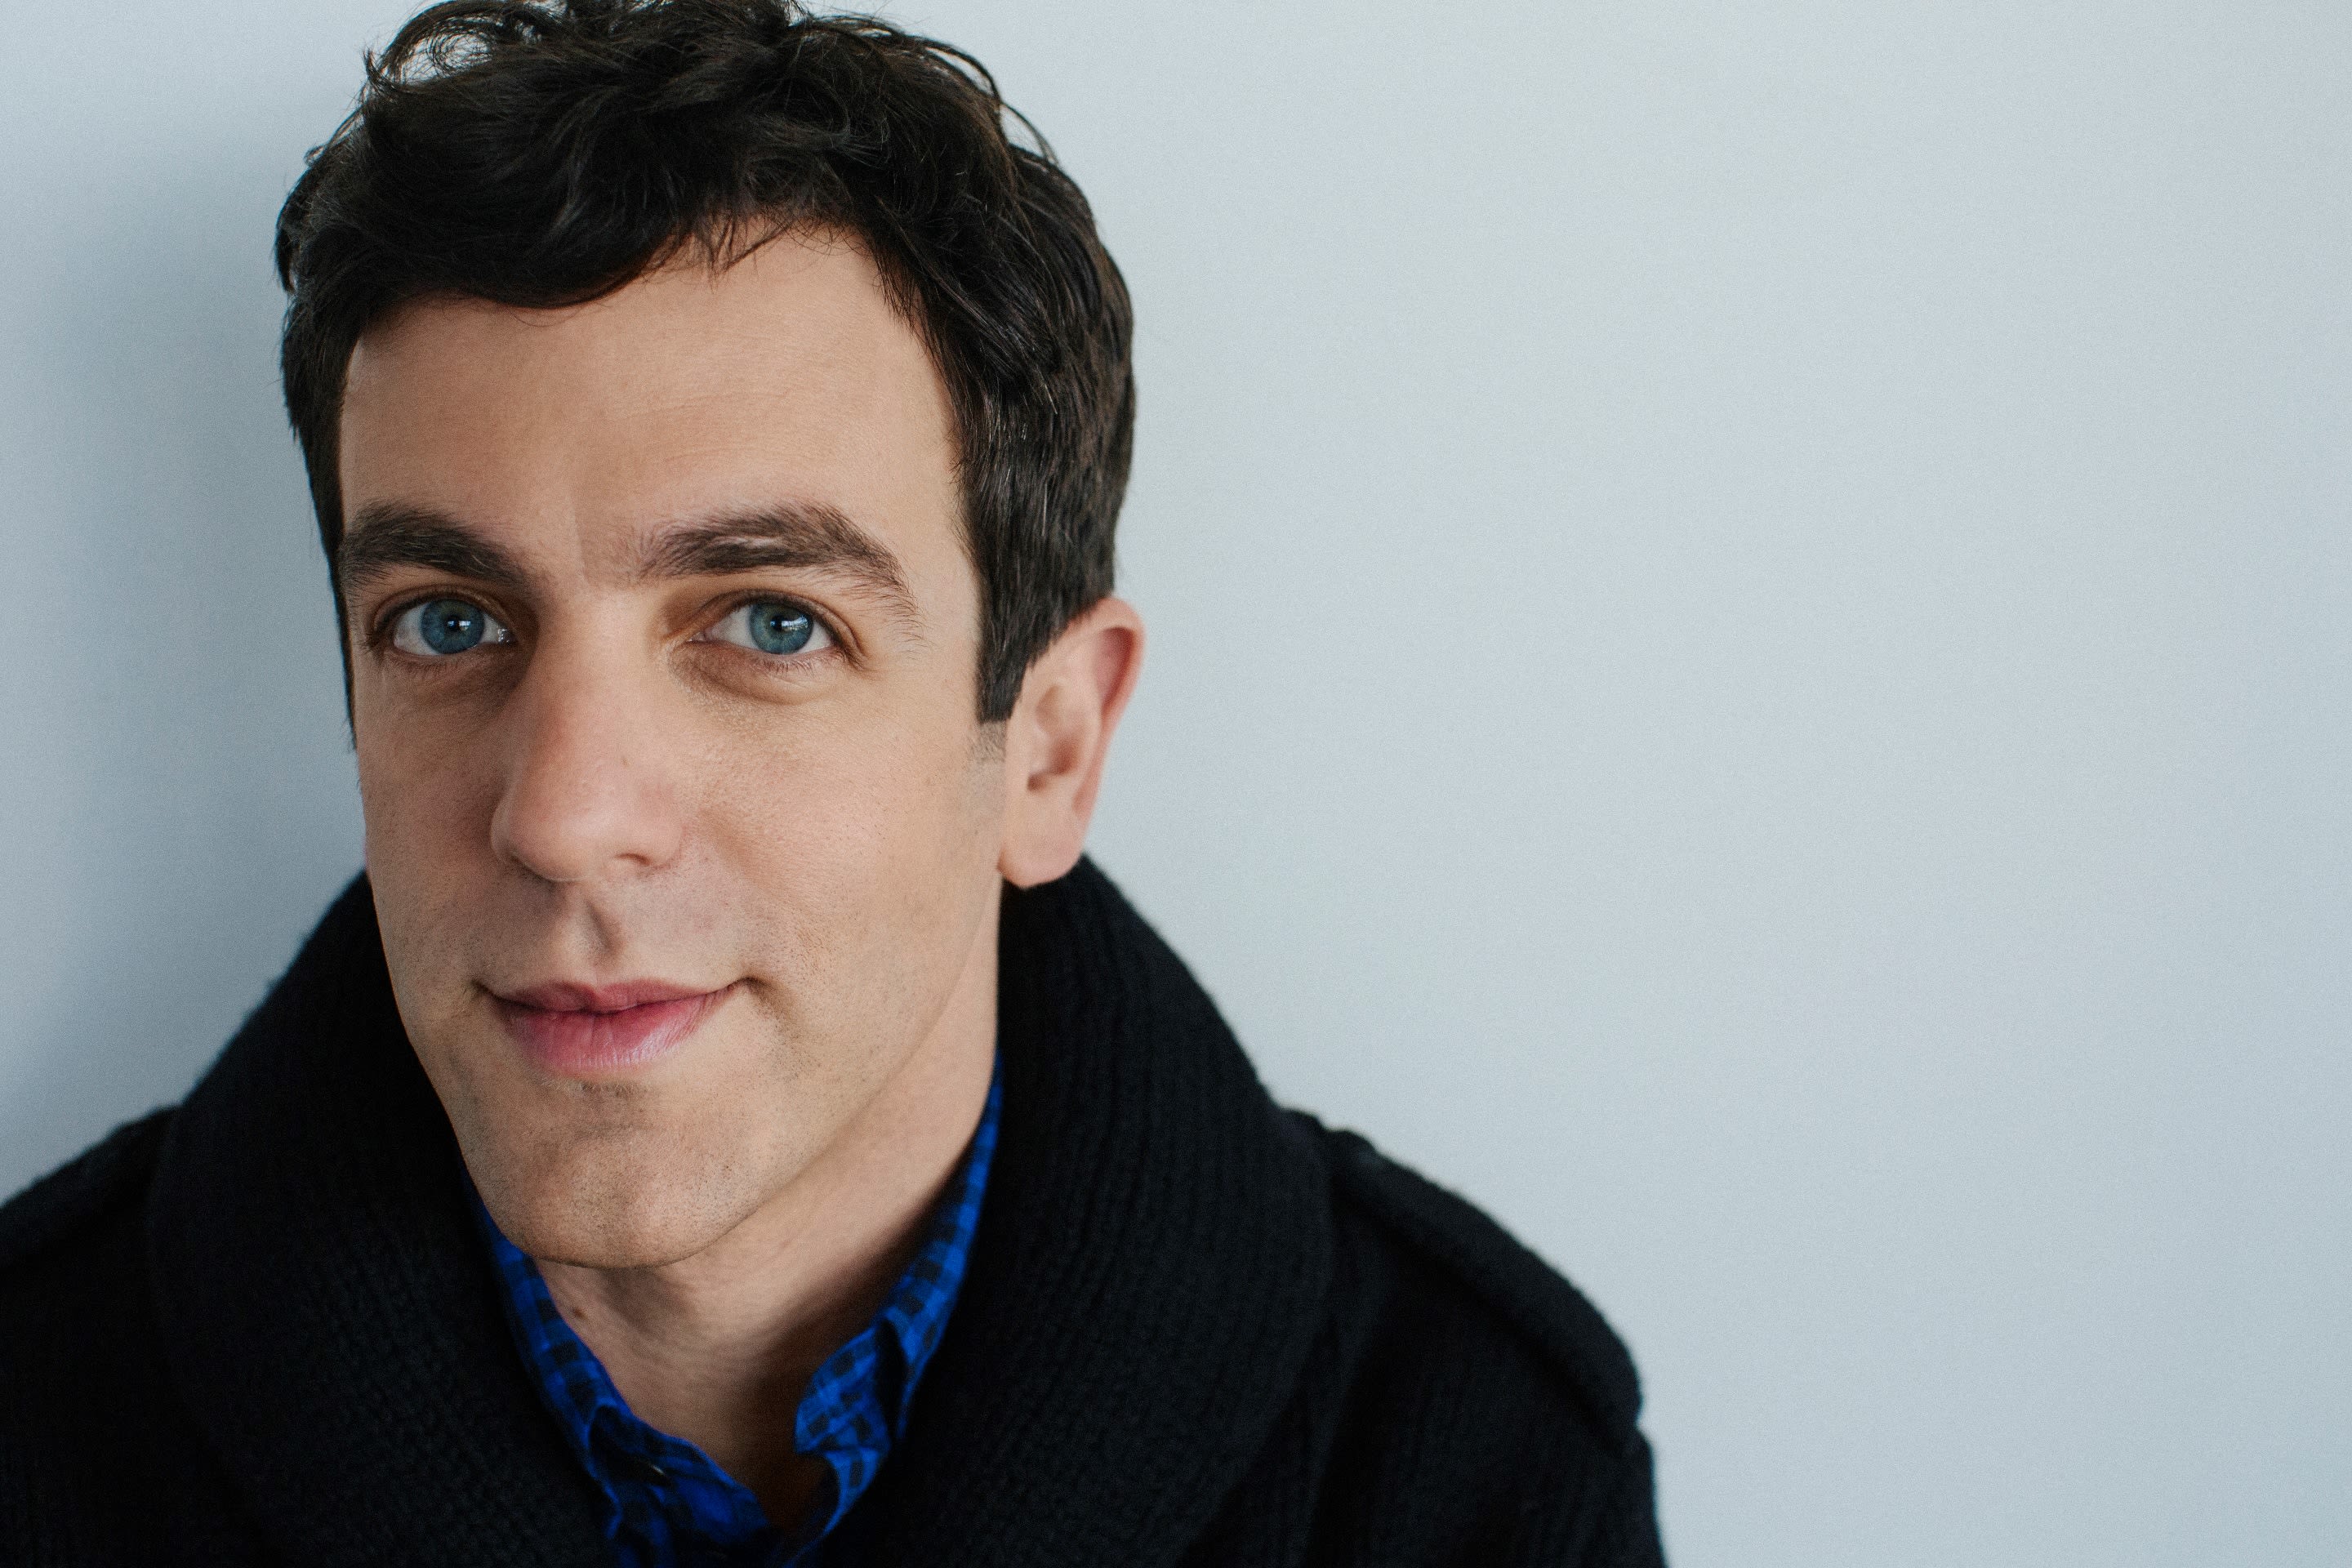 B.J. Novak: The Best Episodes Of The Office Featuring Ryan Howard